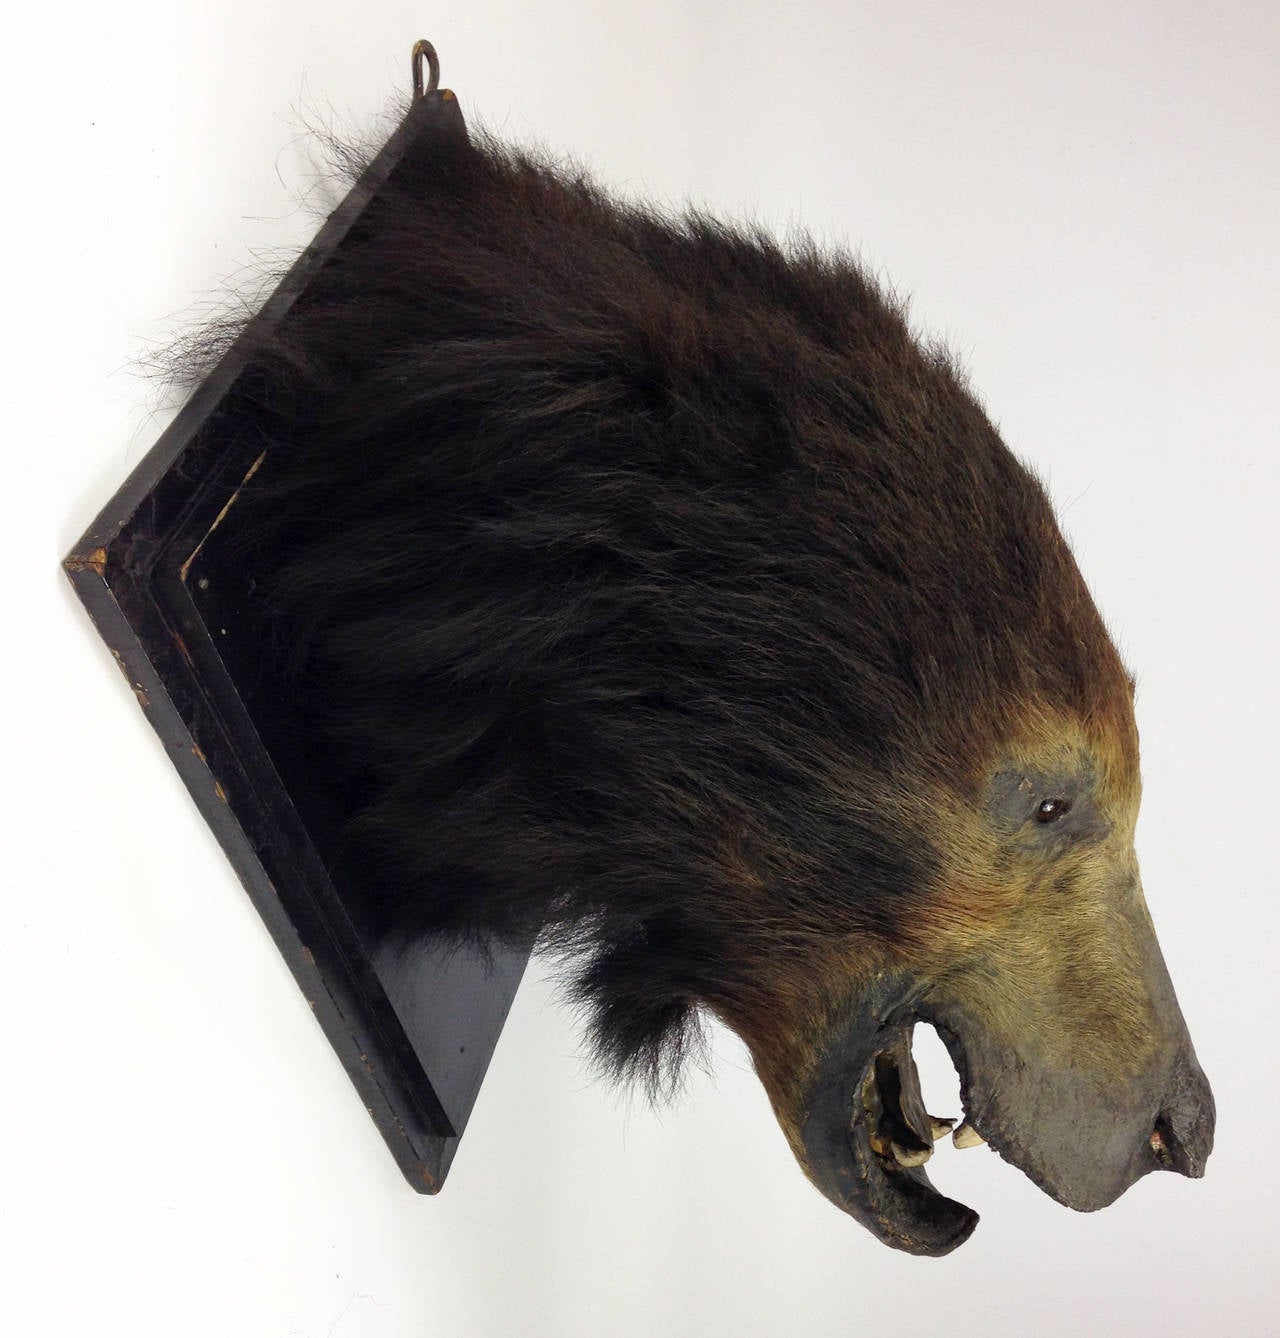 A rare example of a sloth bear (Melursus Ursinus) taxidermy mount with James Gardner of London trade label to the rear.

Despite dating to around 1890, it's in very good condition for it's age with little or no hair loss and no signs of insect